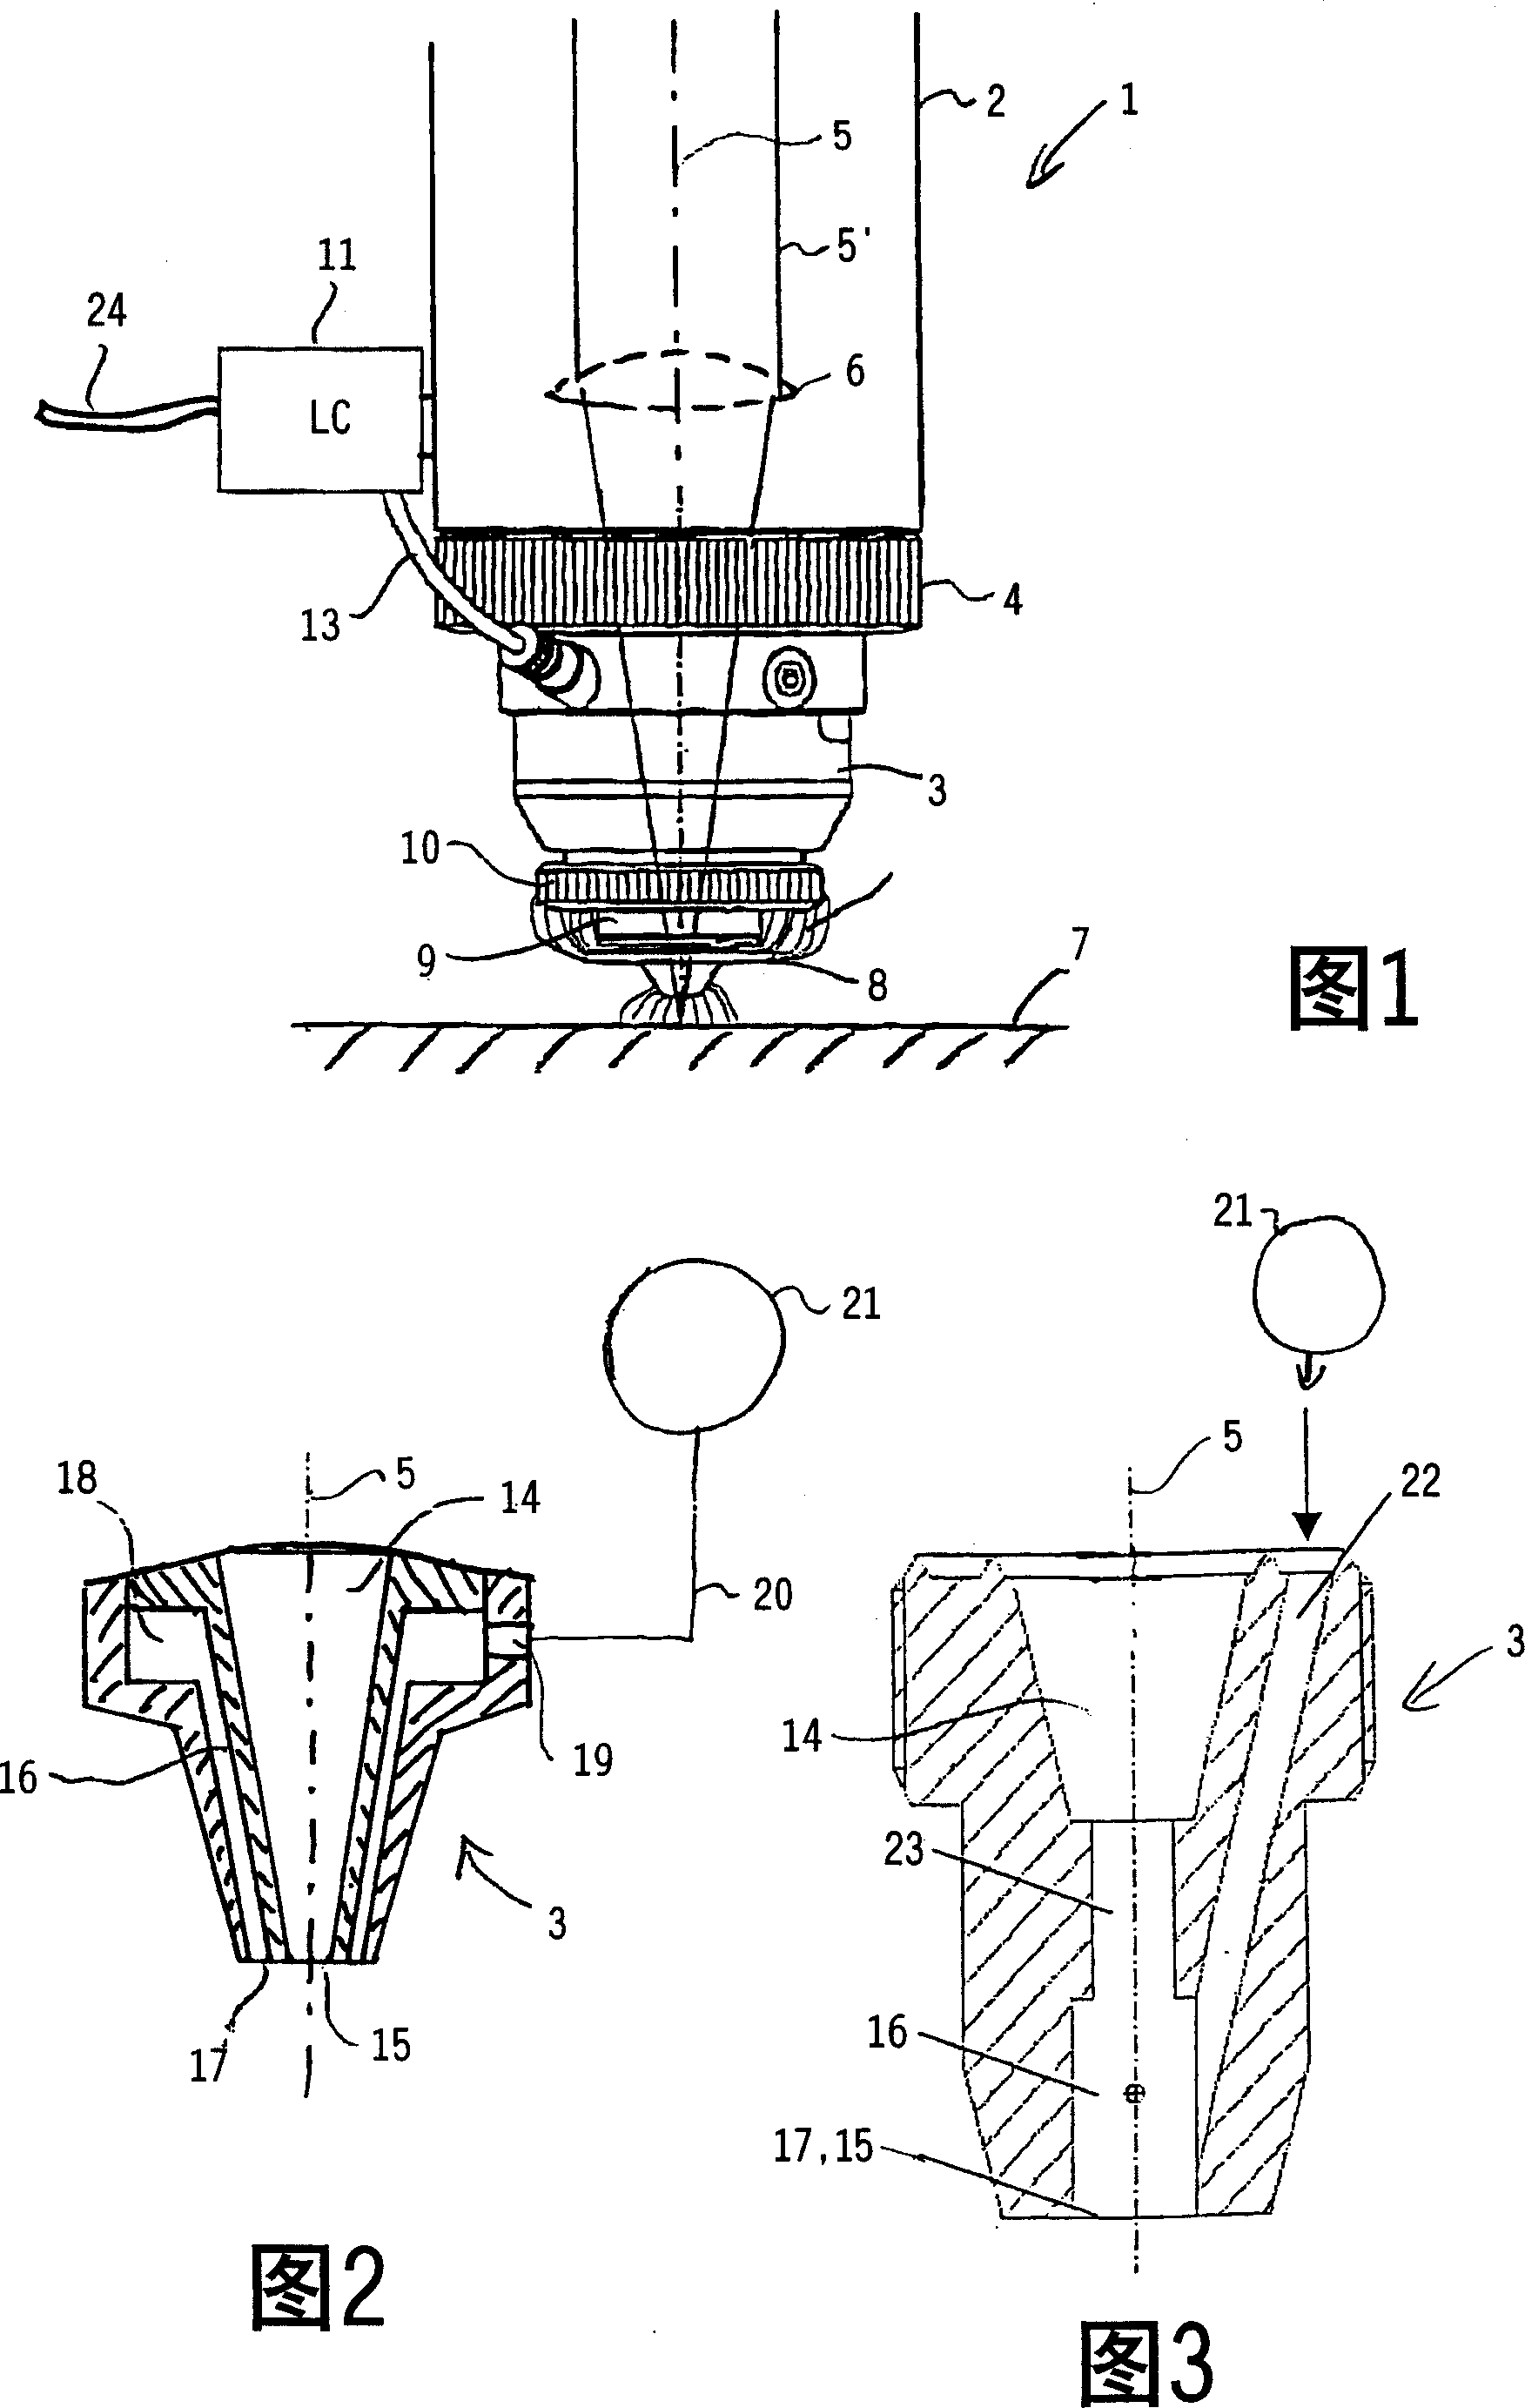 Laser machining apparatus and its running and controlling methods